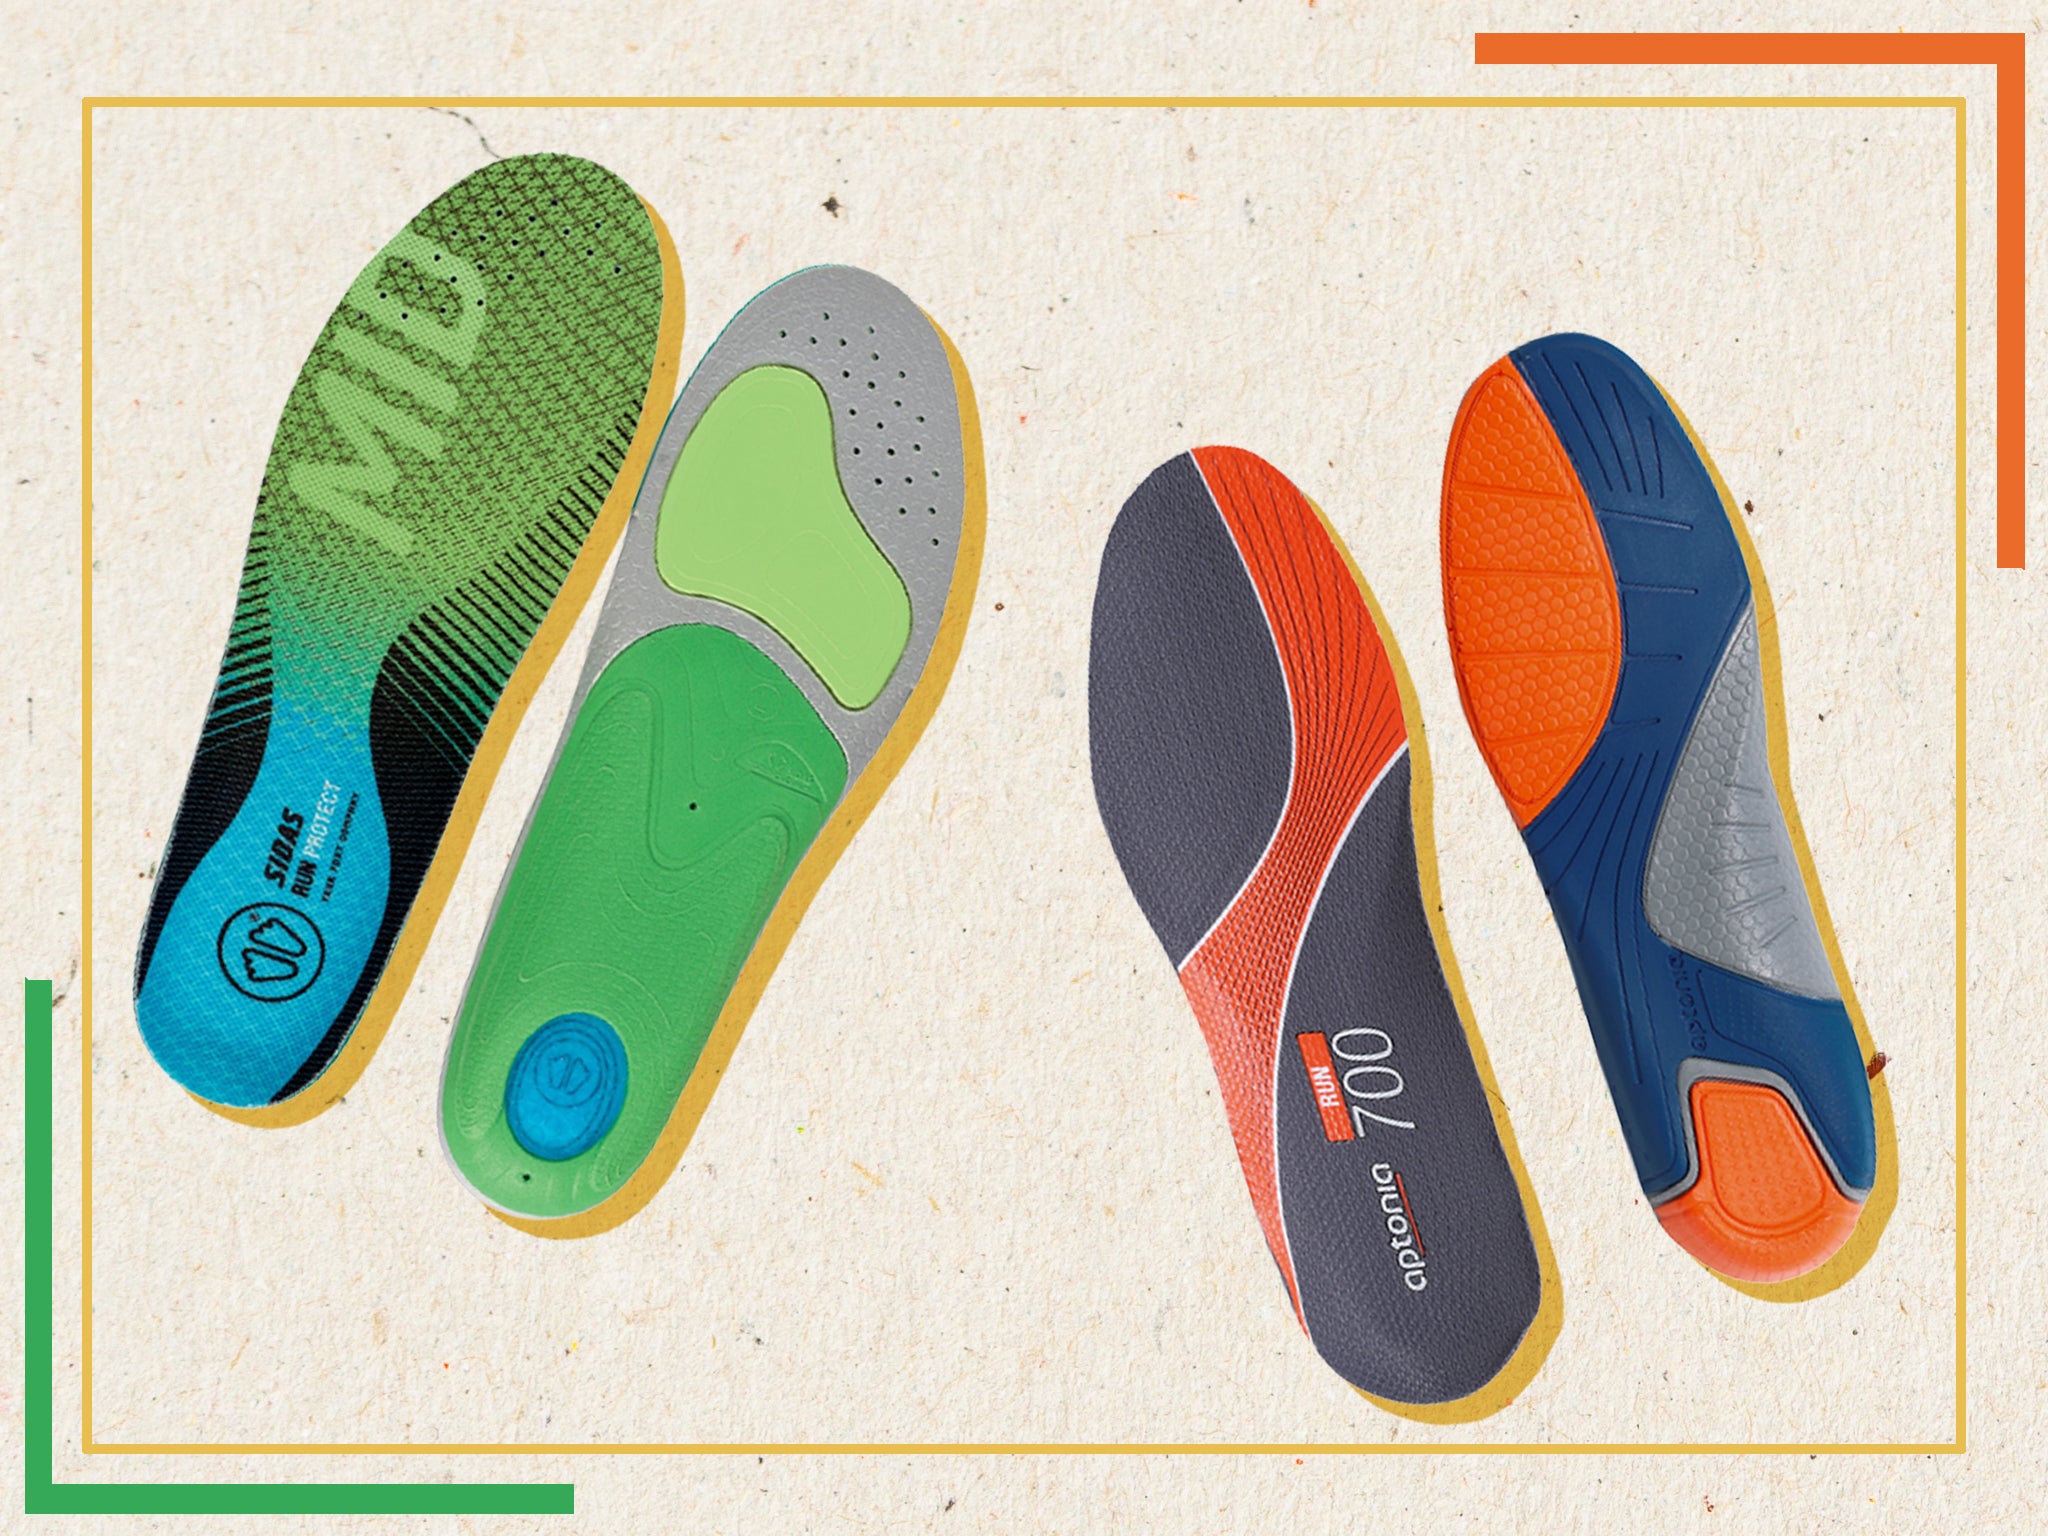 Go Comfort Insoles Shaping a New Kind of Comfort